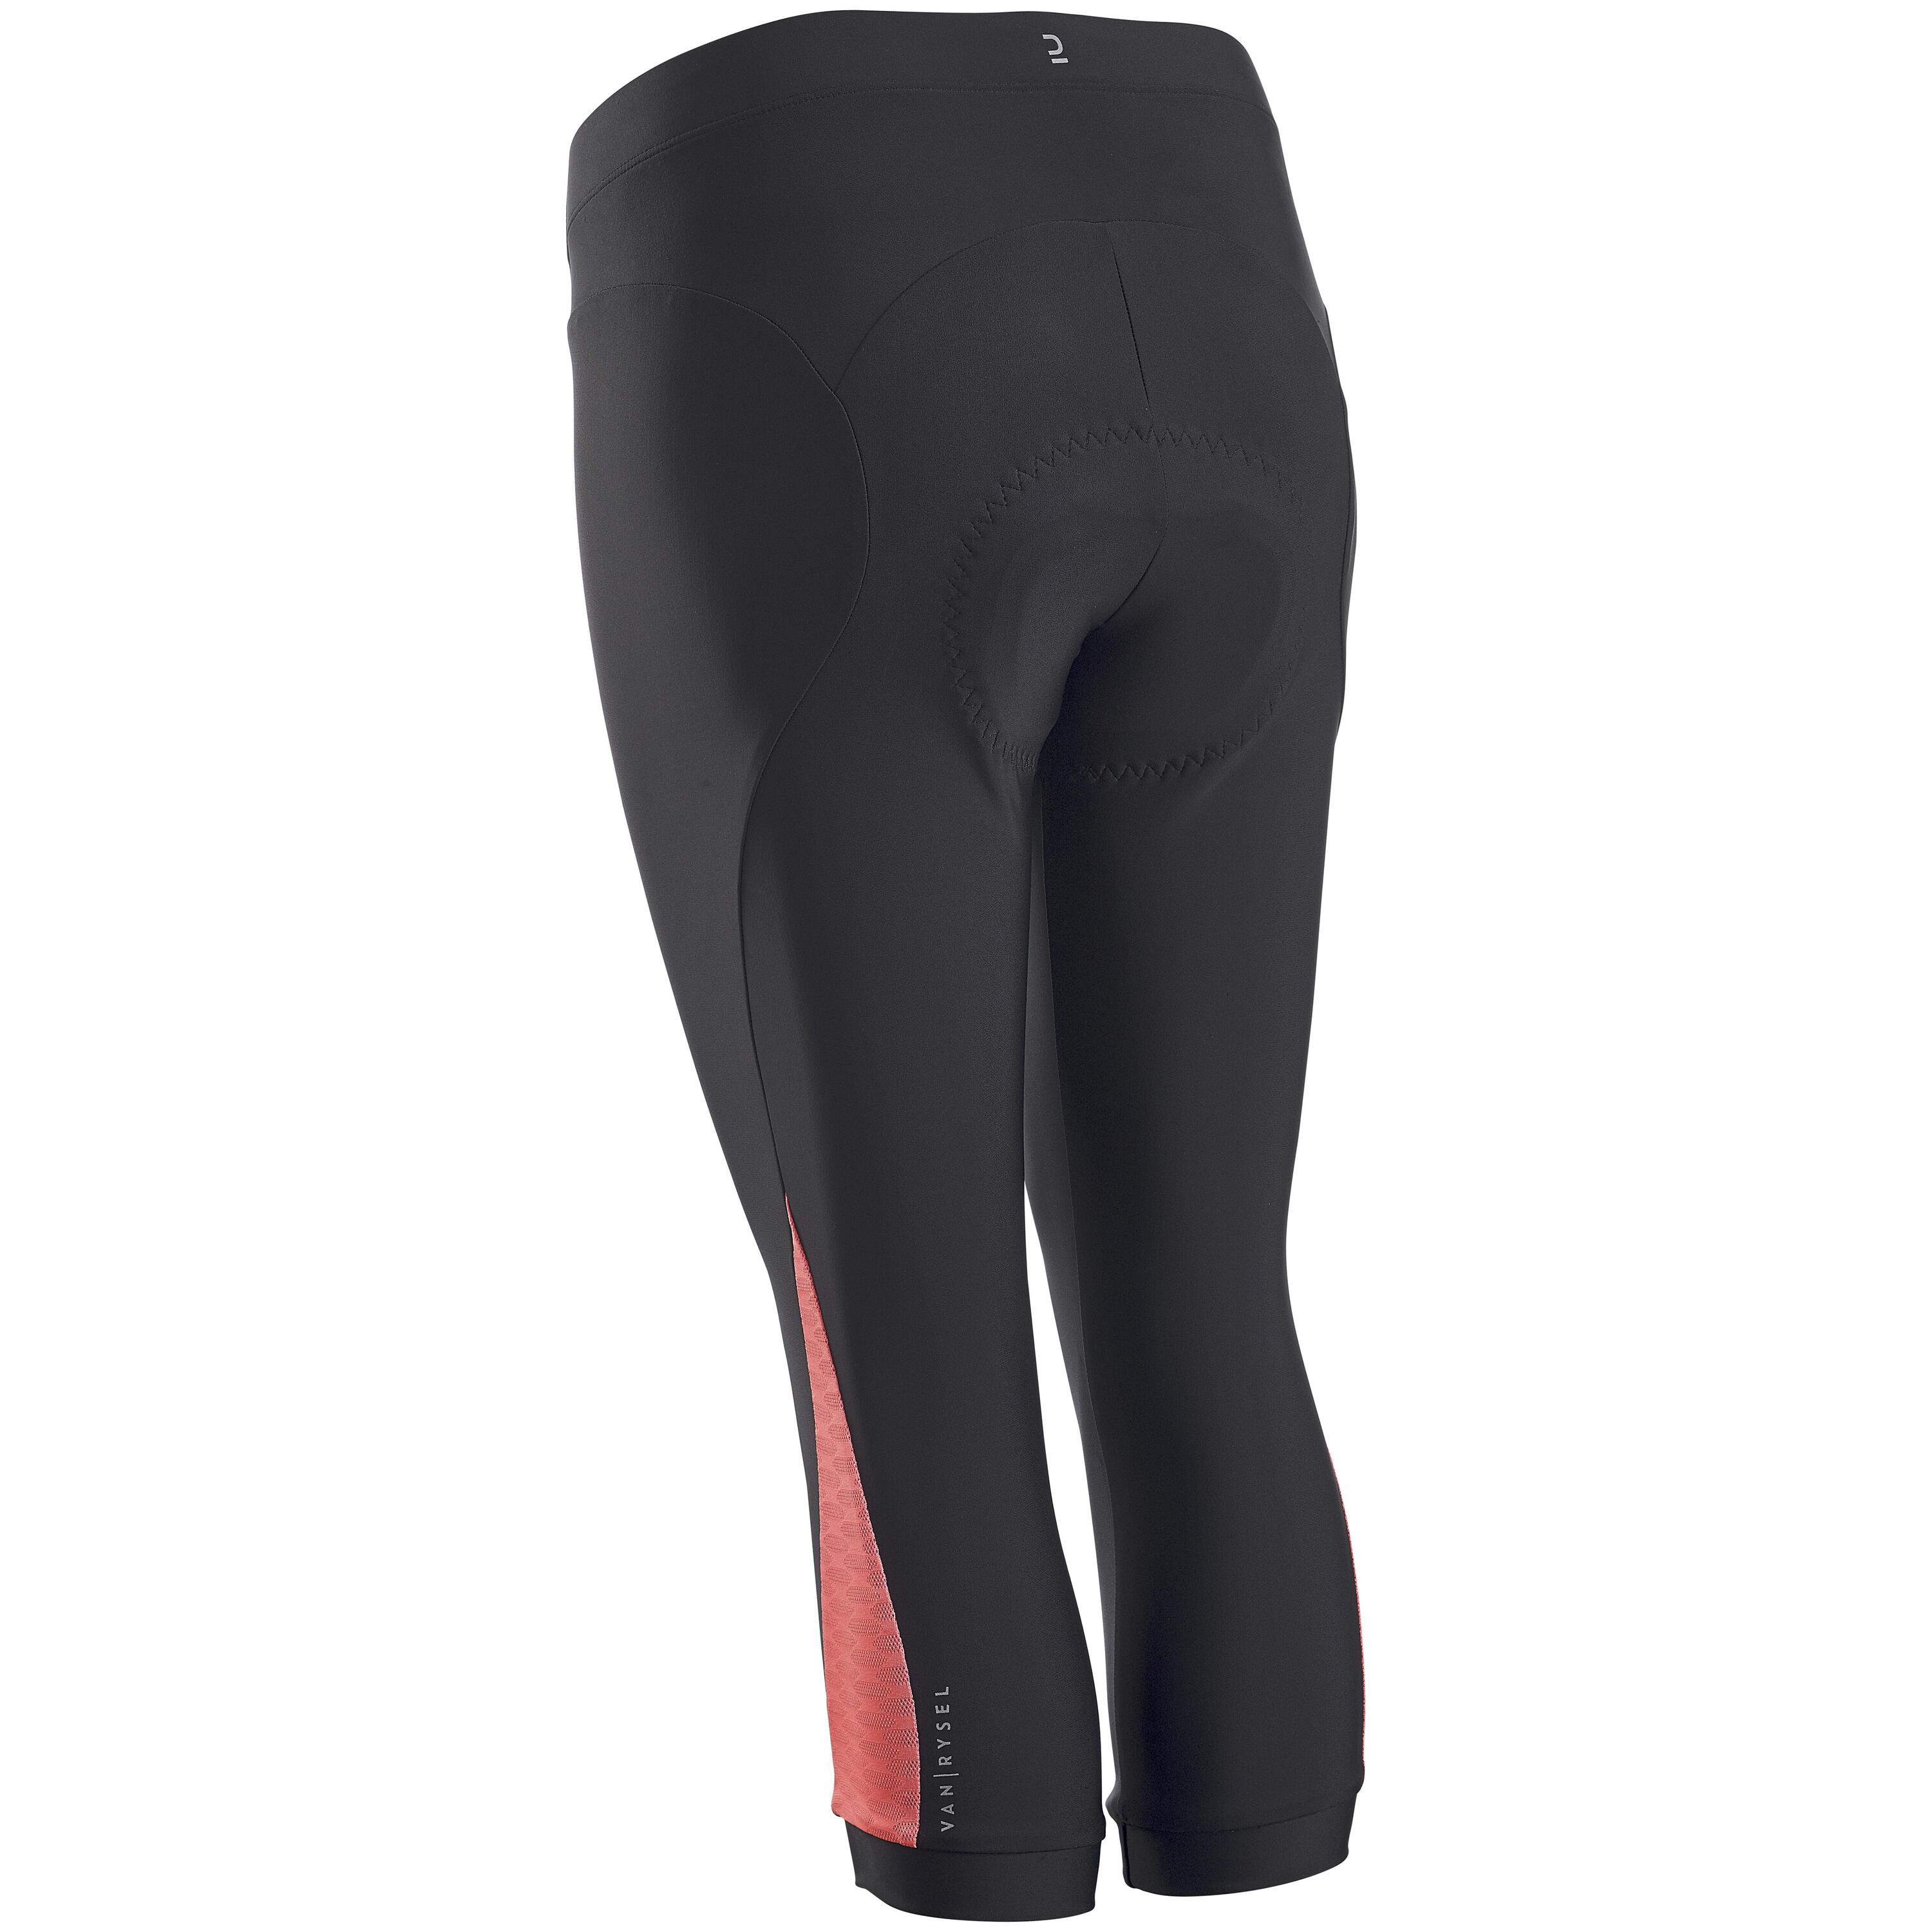 Women's Road Cycling 3/4 Tights 500 - Black/Coral 2/3